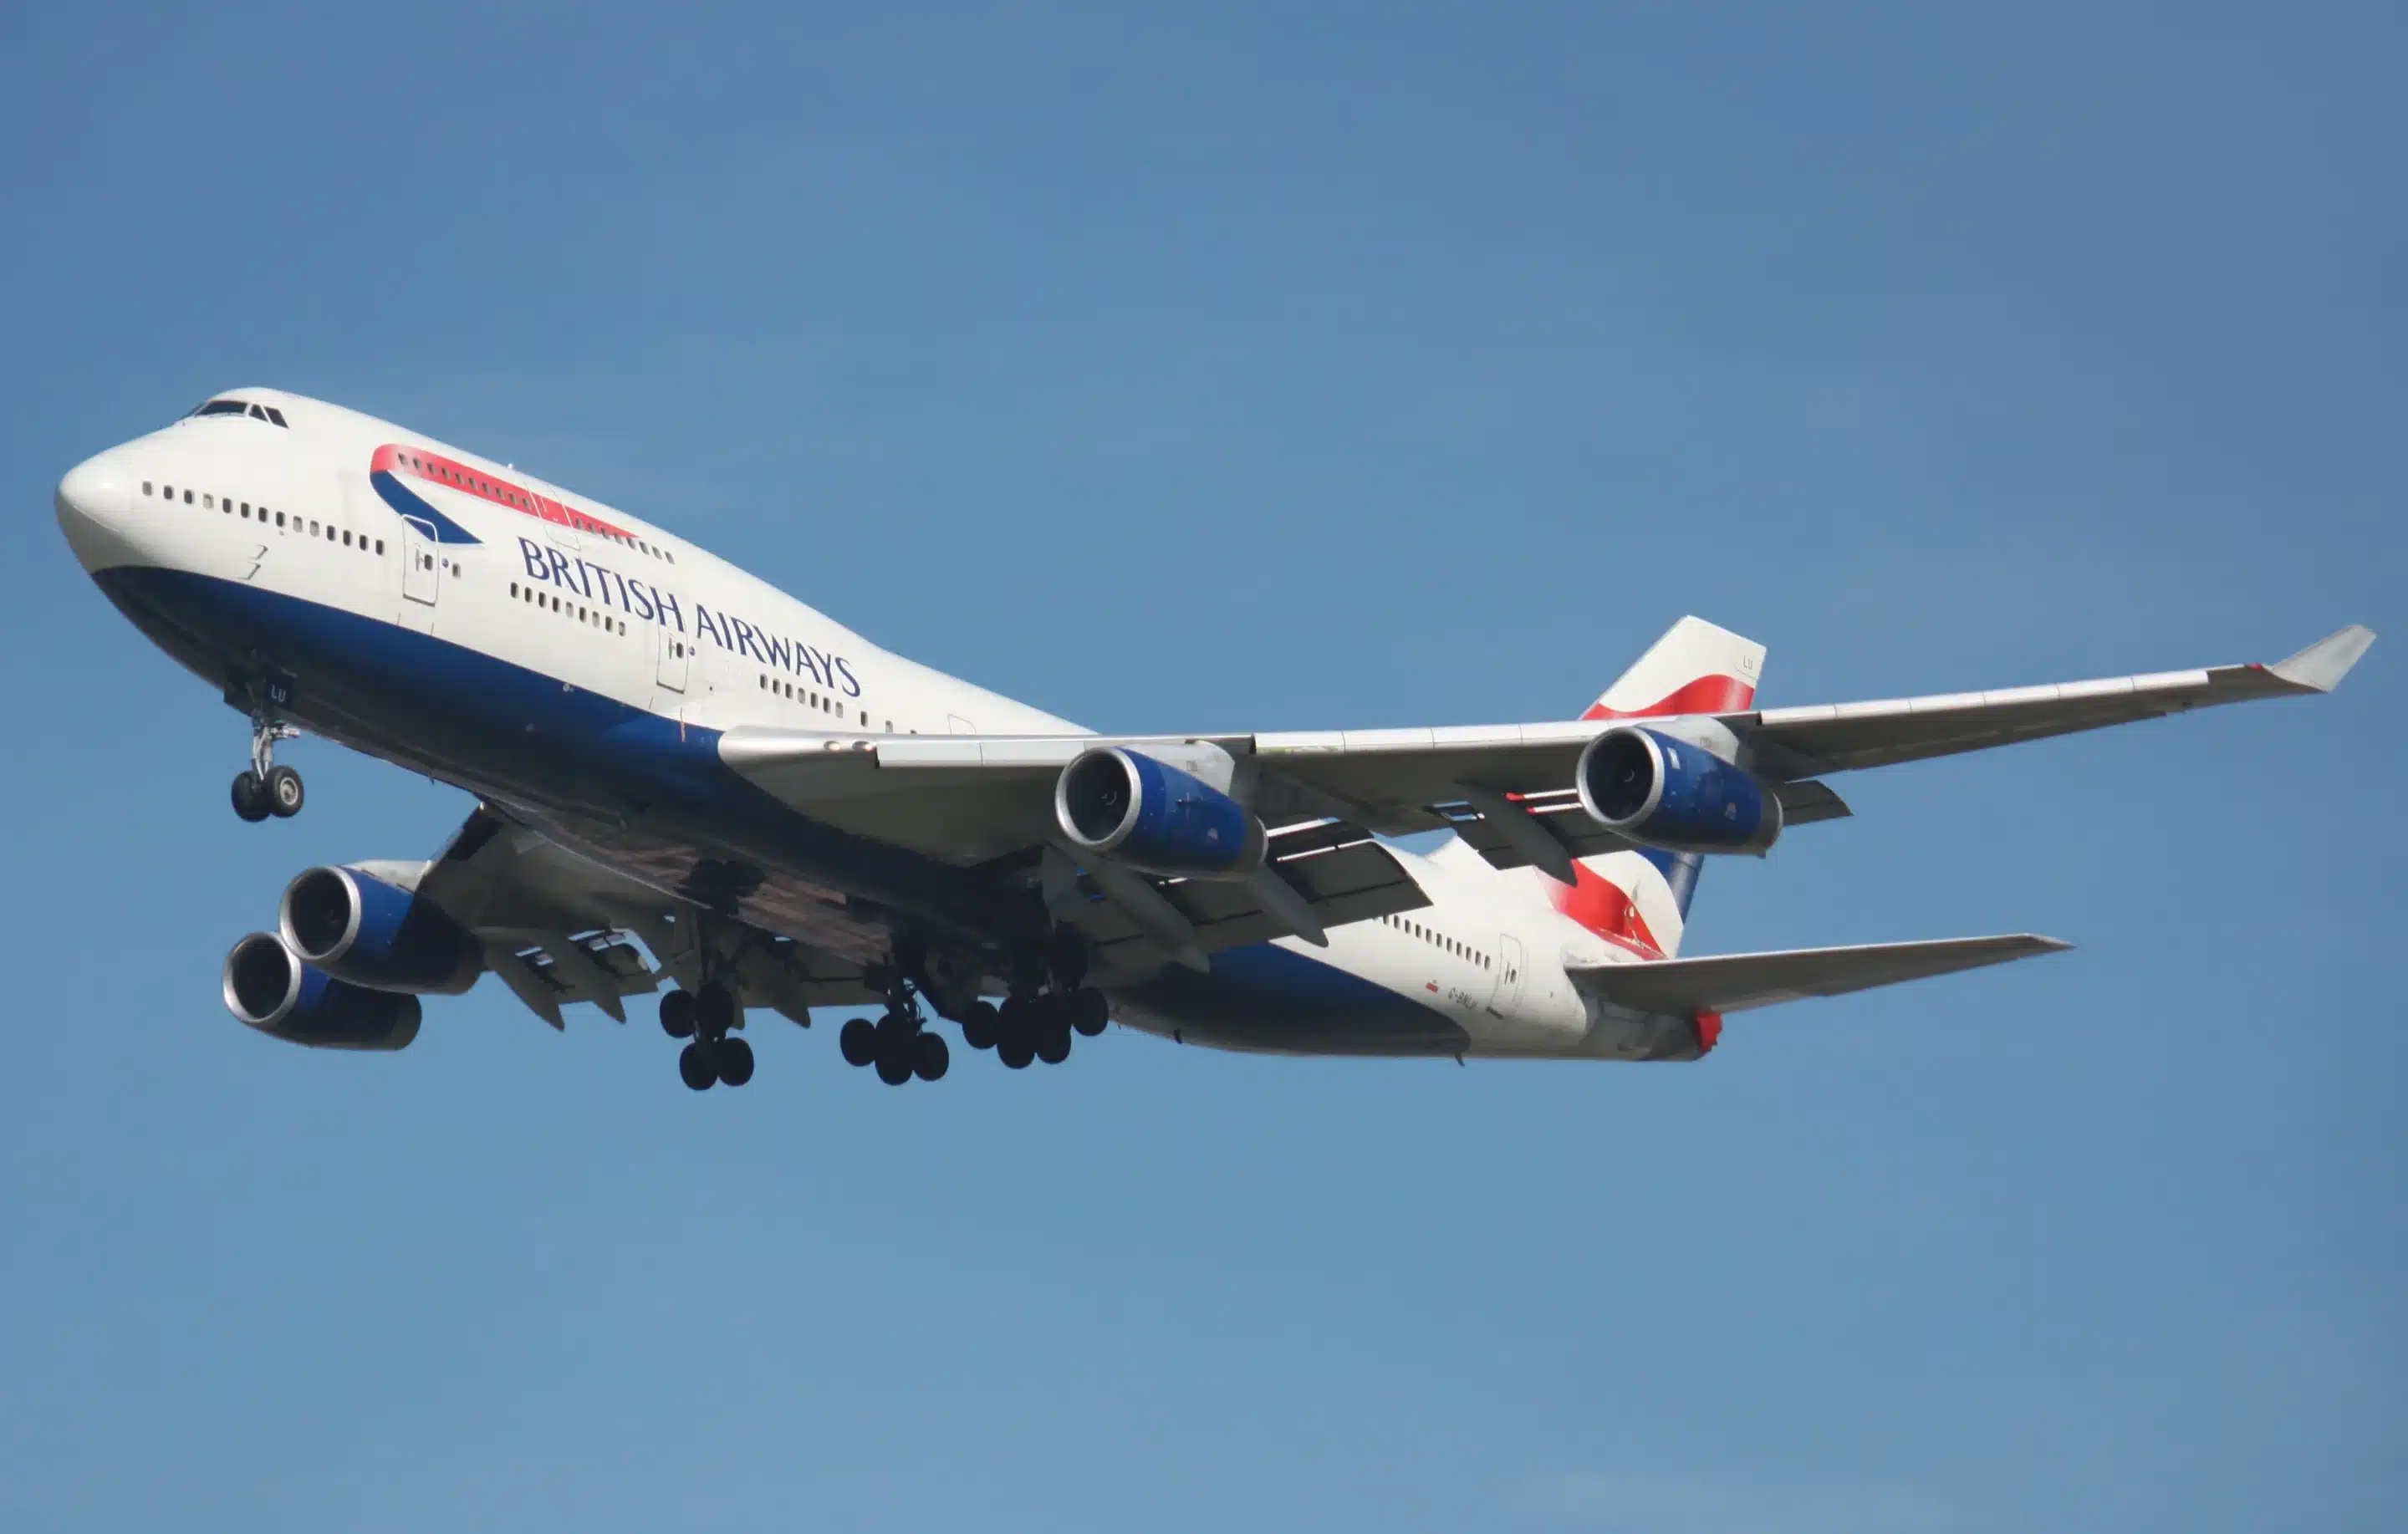 Pilot for 40 years reveals why his favorite aircraft was the Boeing 747-400